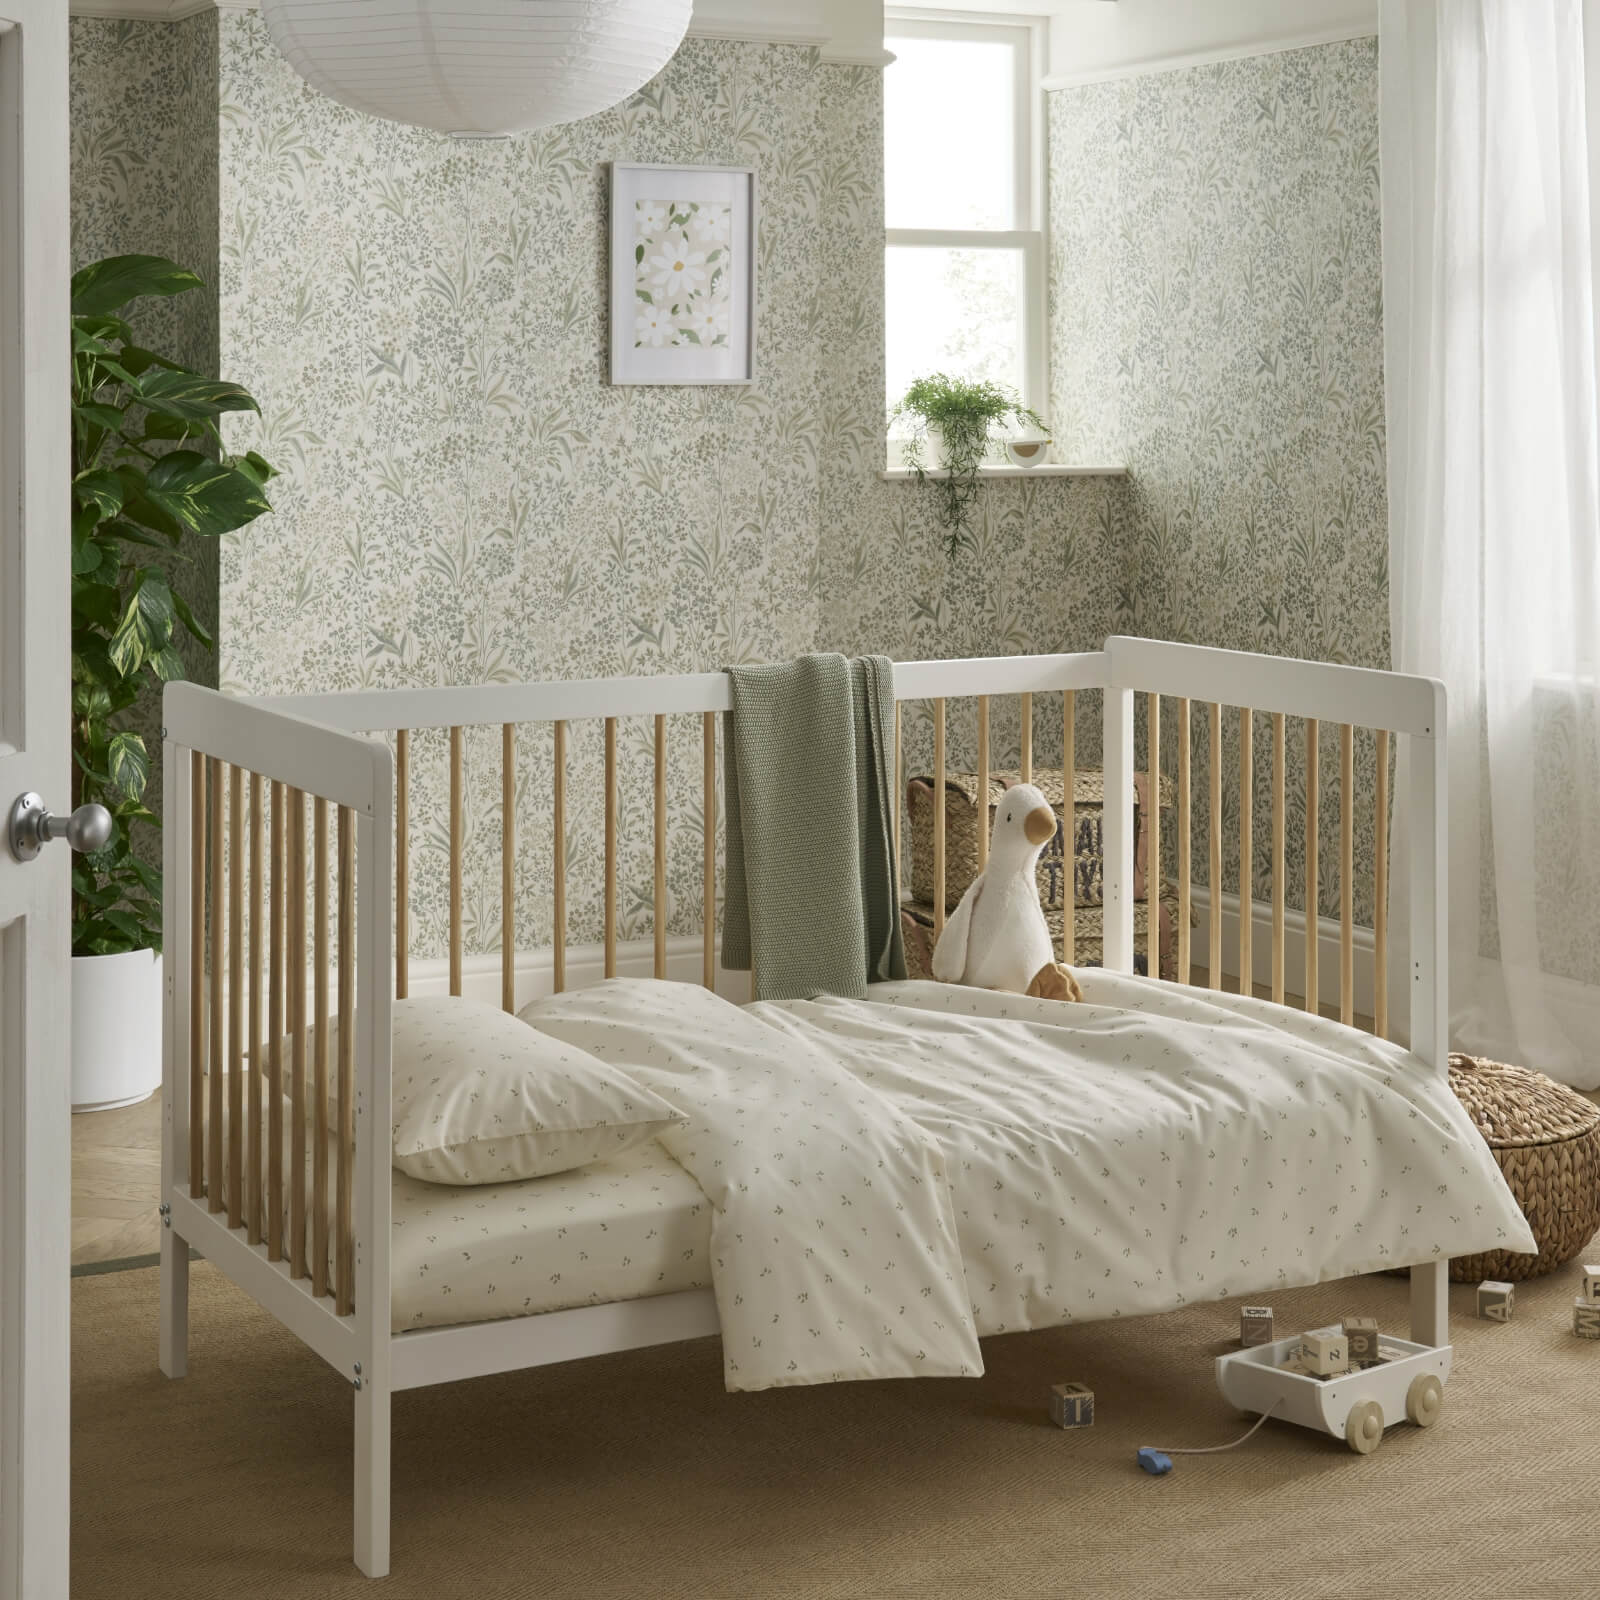 CuddleCo Nursery Room Sets CuddleCo Nola Cot Bed - White & Natural